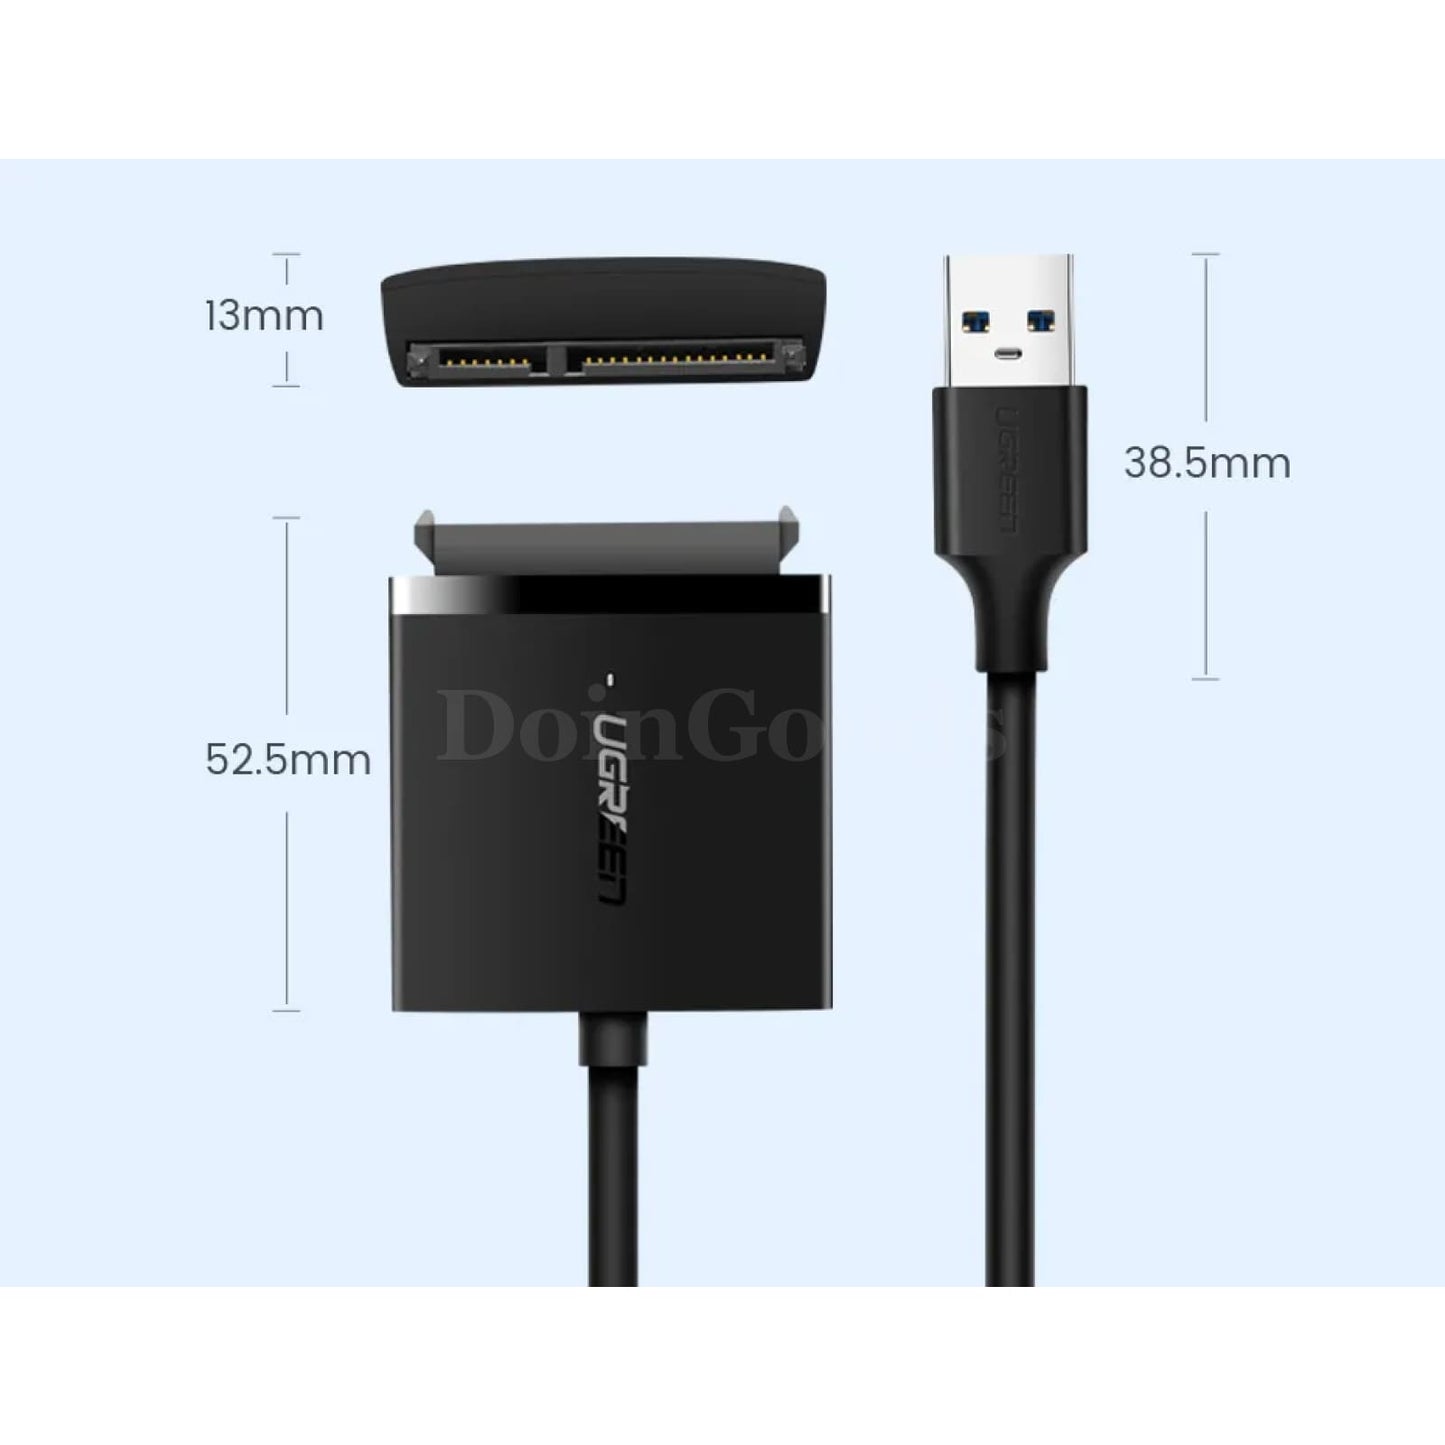 Ugreen Sata 3 To Usb Adapter 3.0/2.0 Cable Converter For 2.5 3.5 Hdd Ssd 301635